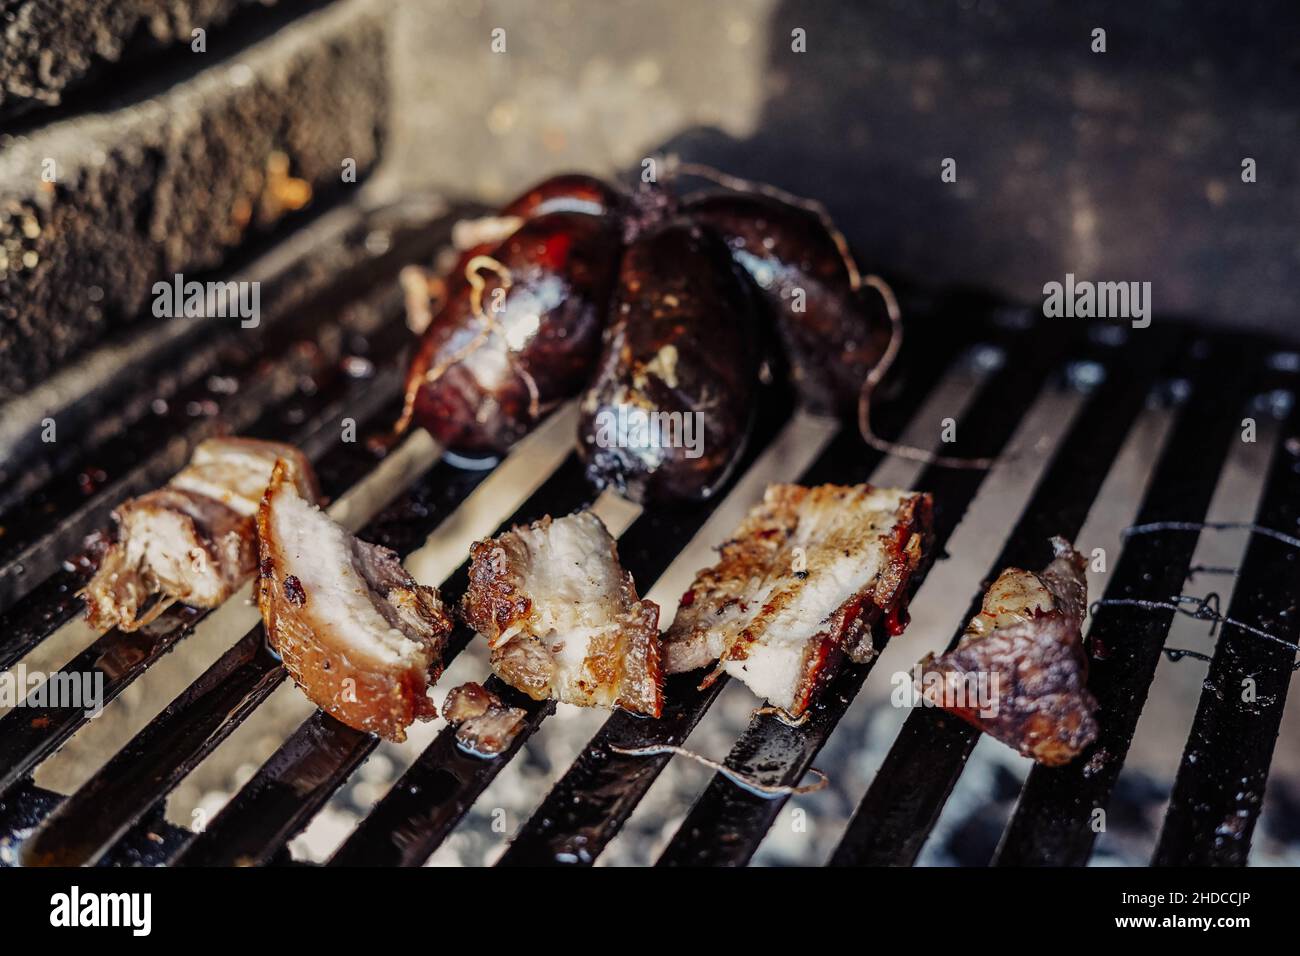 South American style barbecue with different cuts of veal Stock Photo